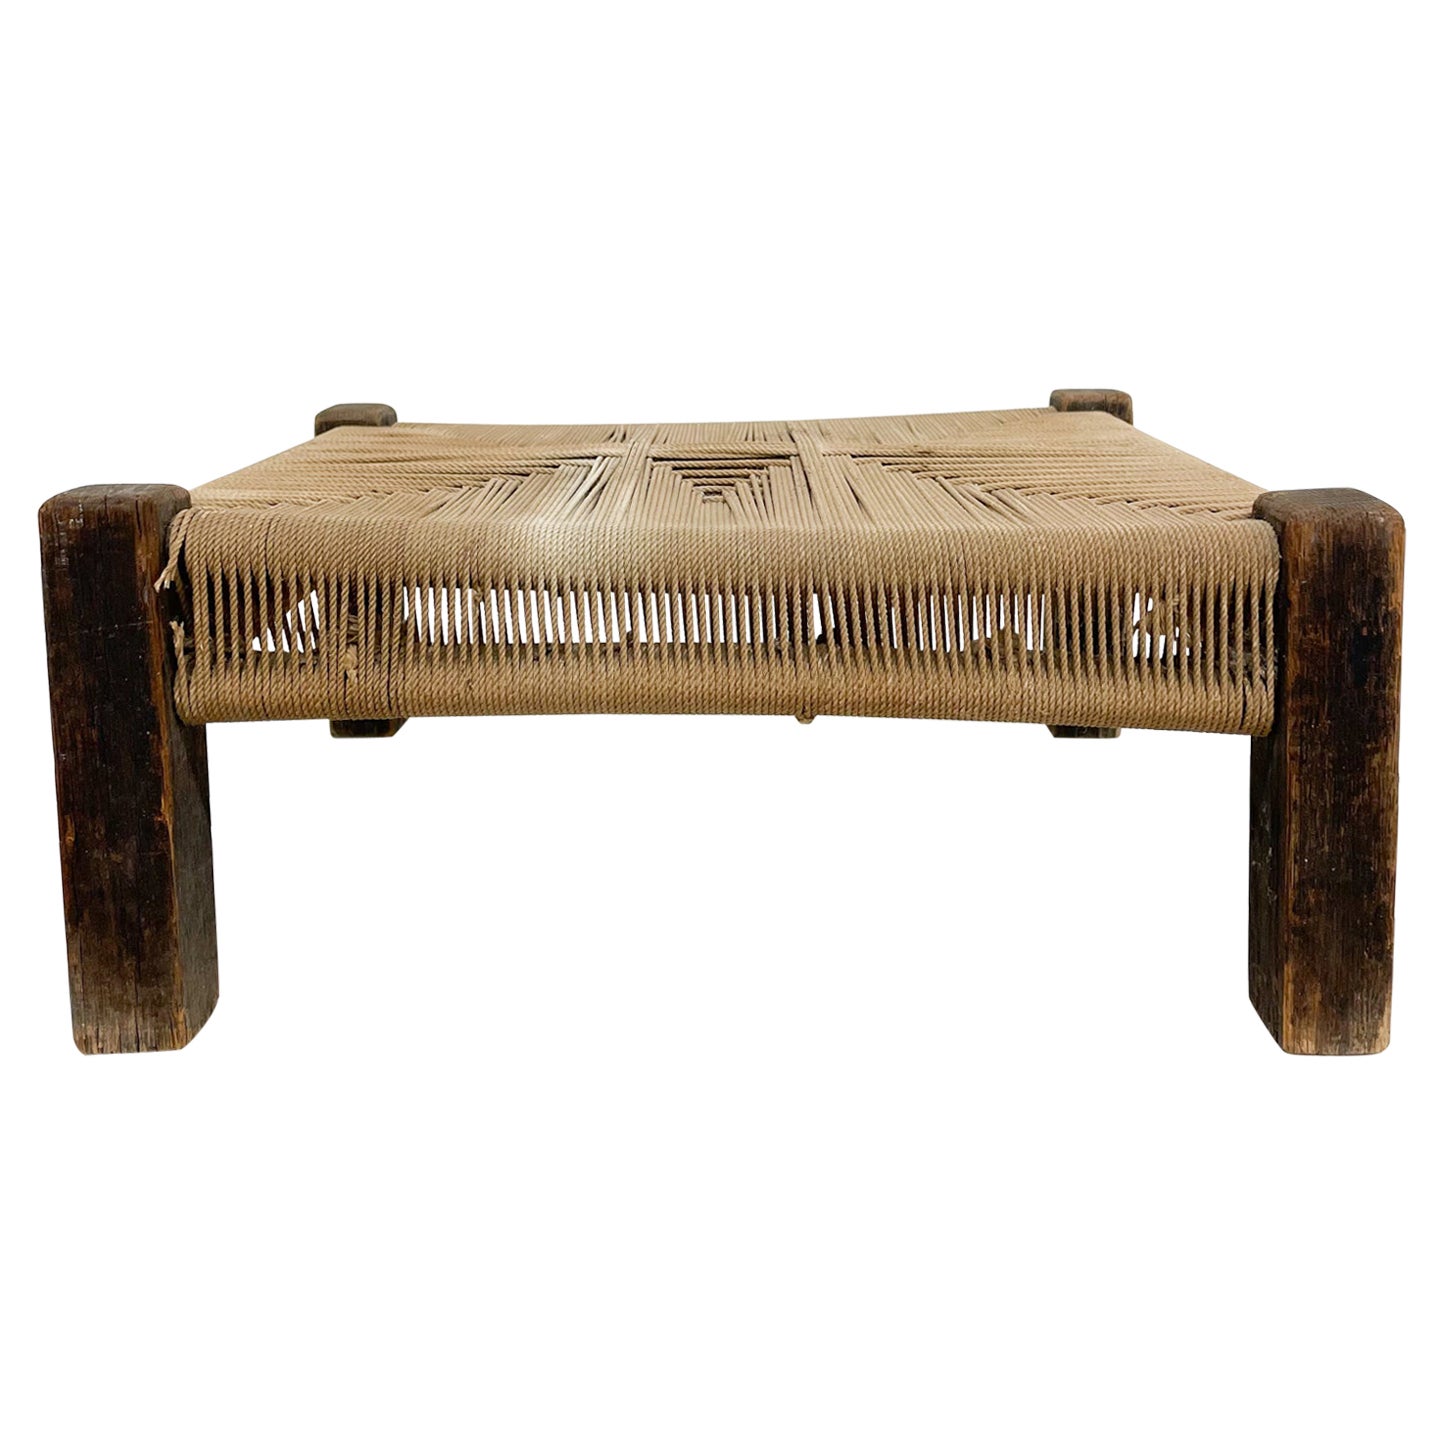 Rustic Low-Profile Stool in Woven Rope on Wood Frame Arts & Crafts